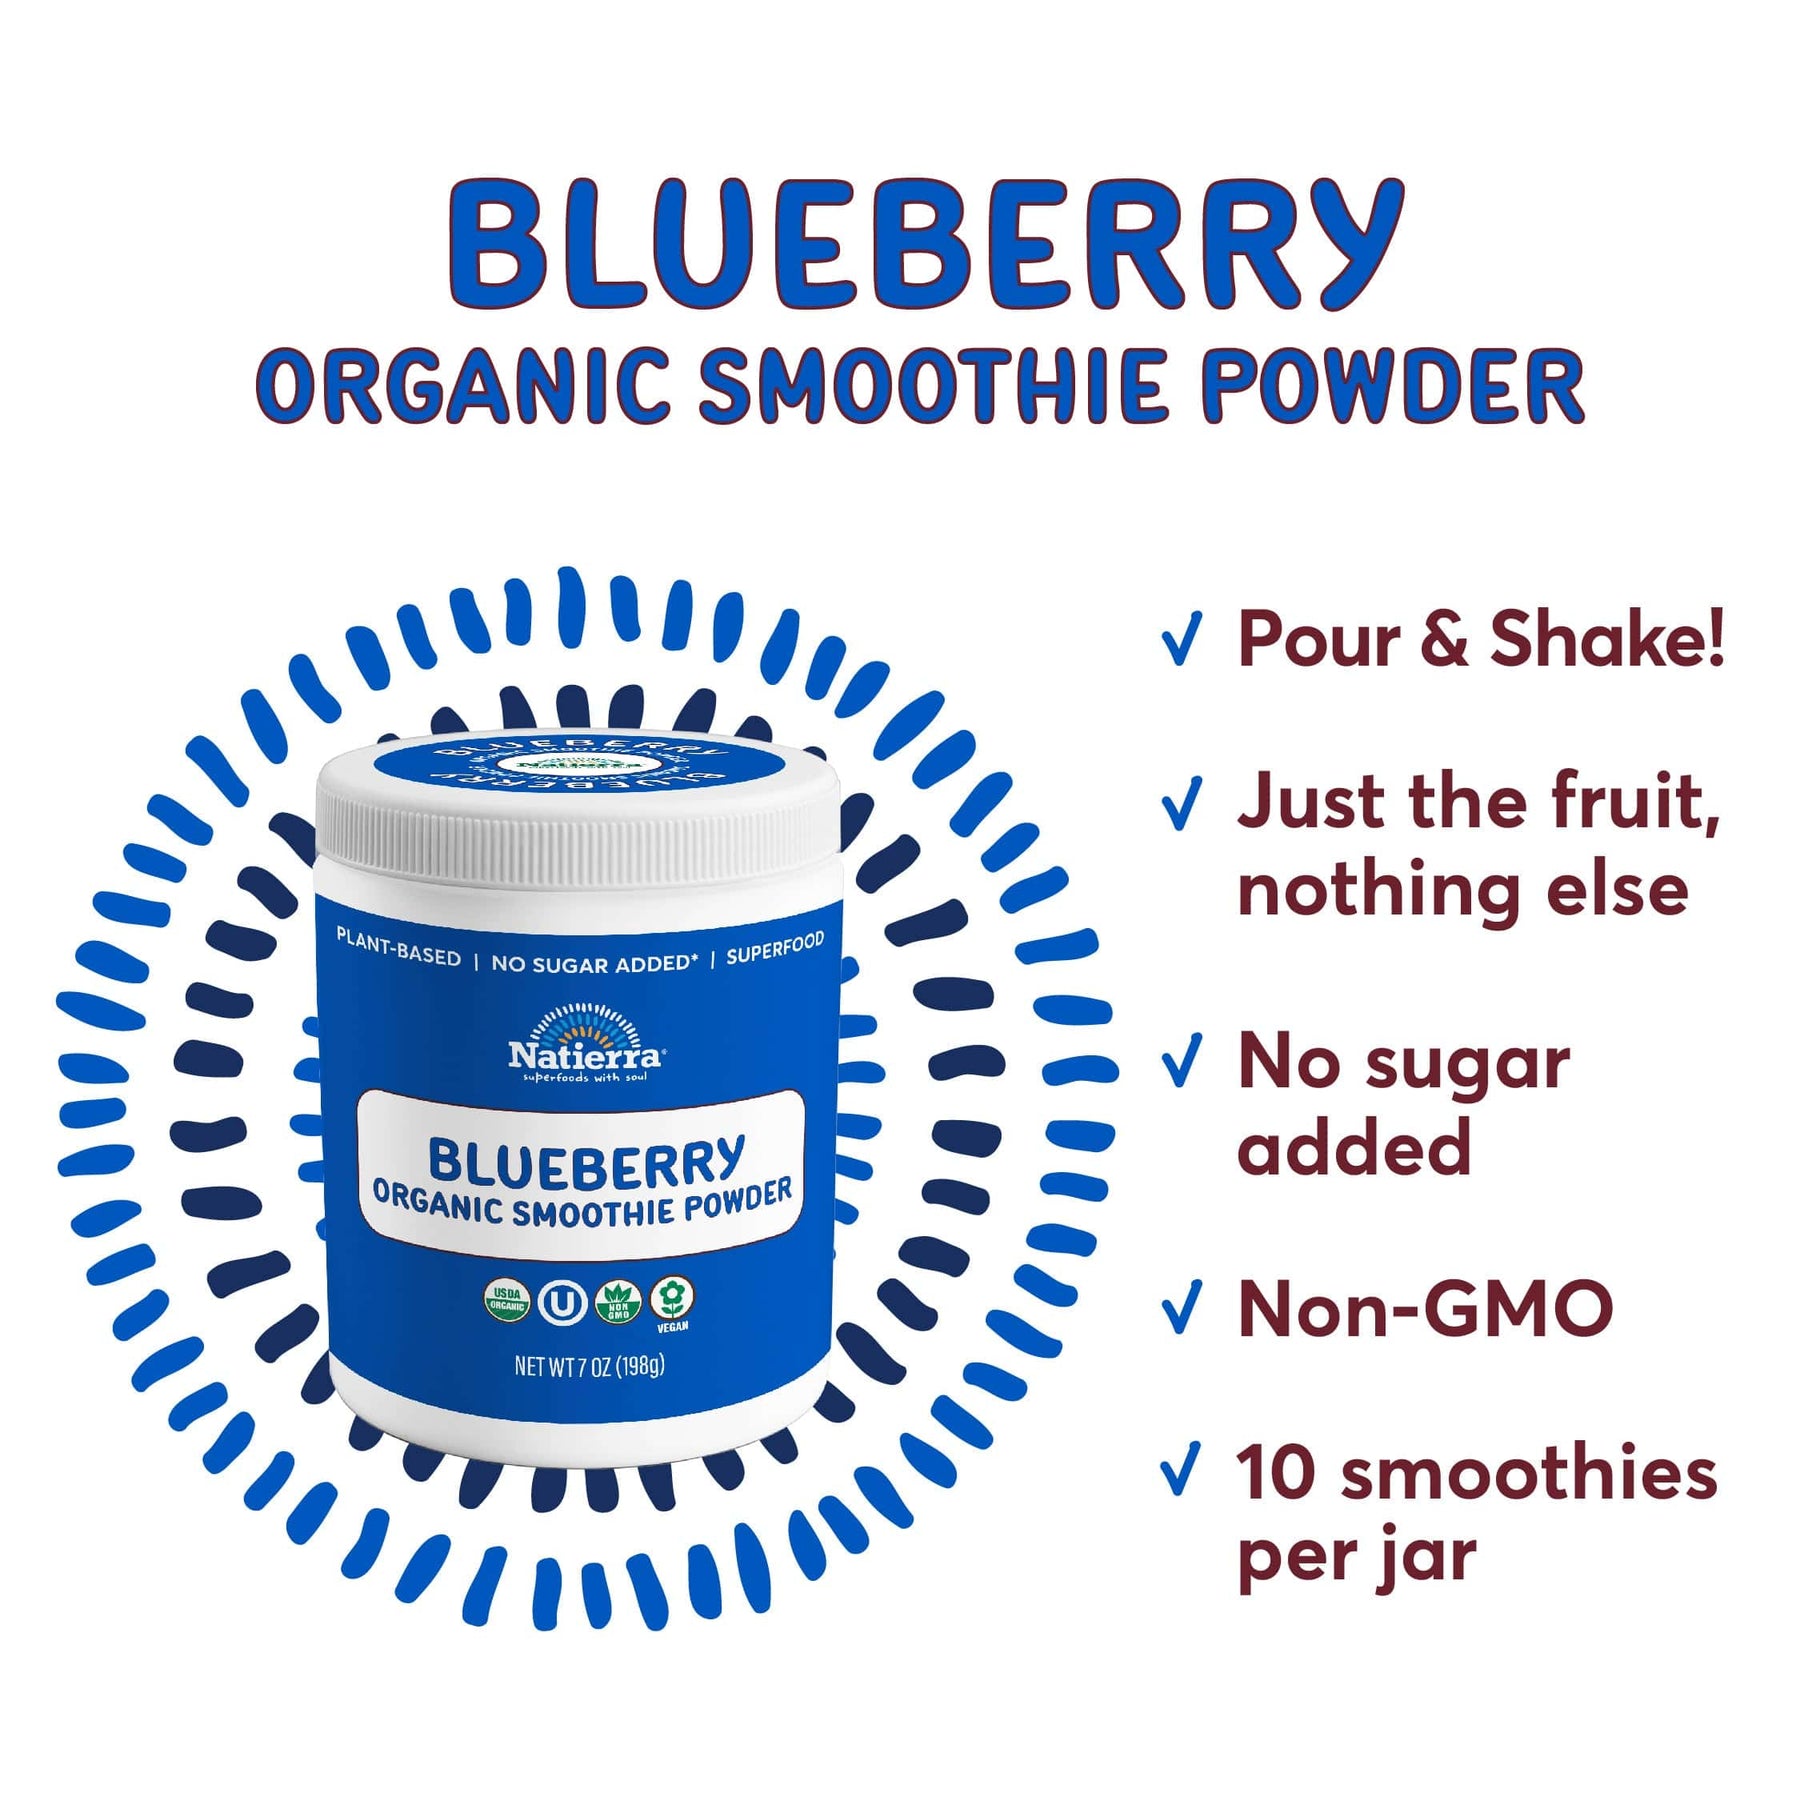 A jar of Natierra Blueberry Organic Smoothie Powder next to list of main product claims